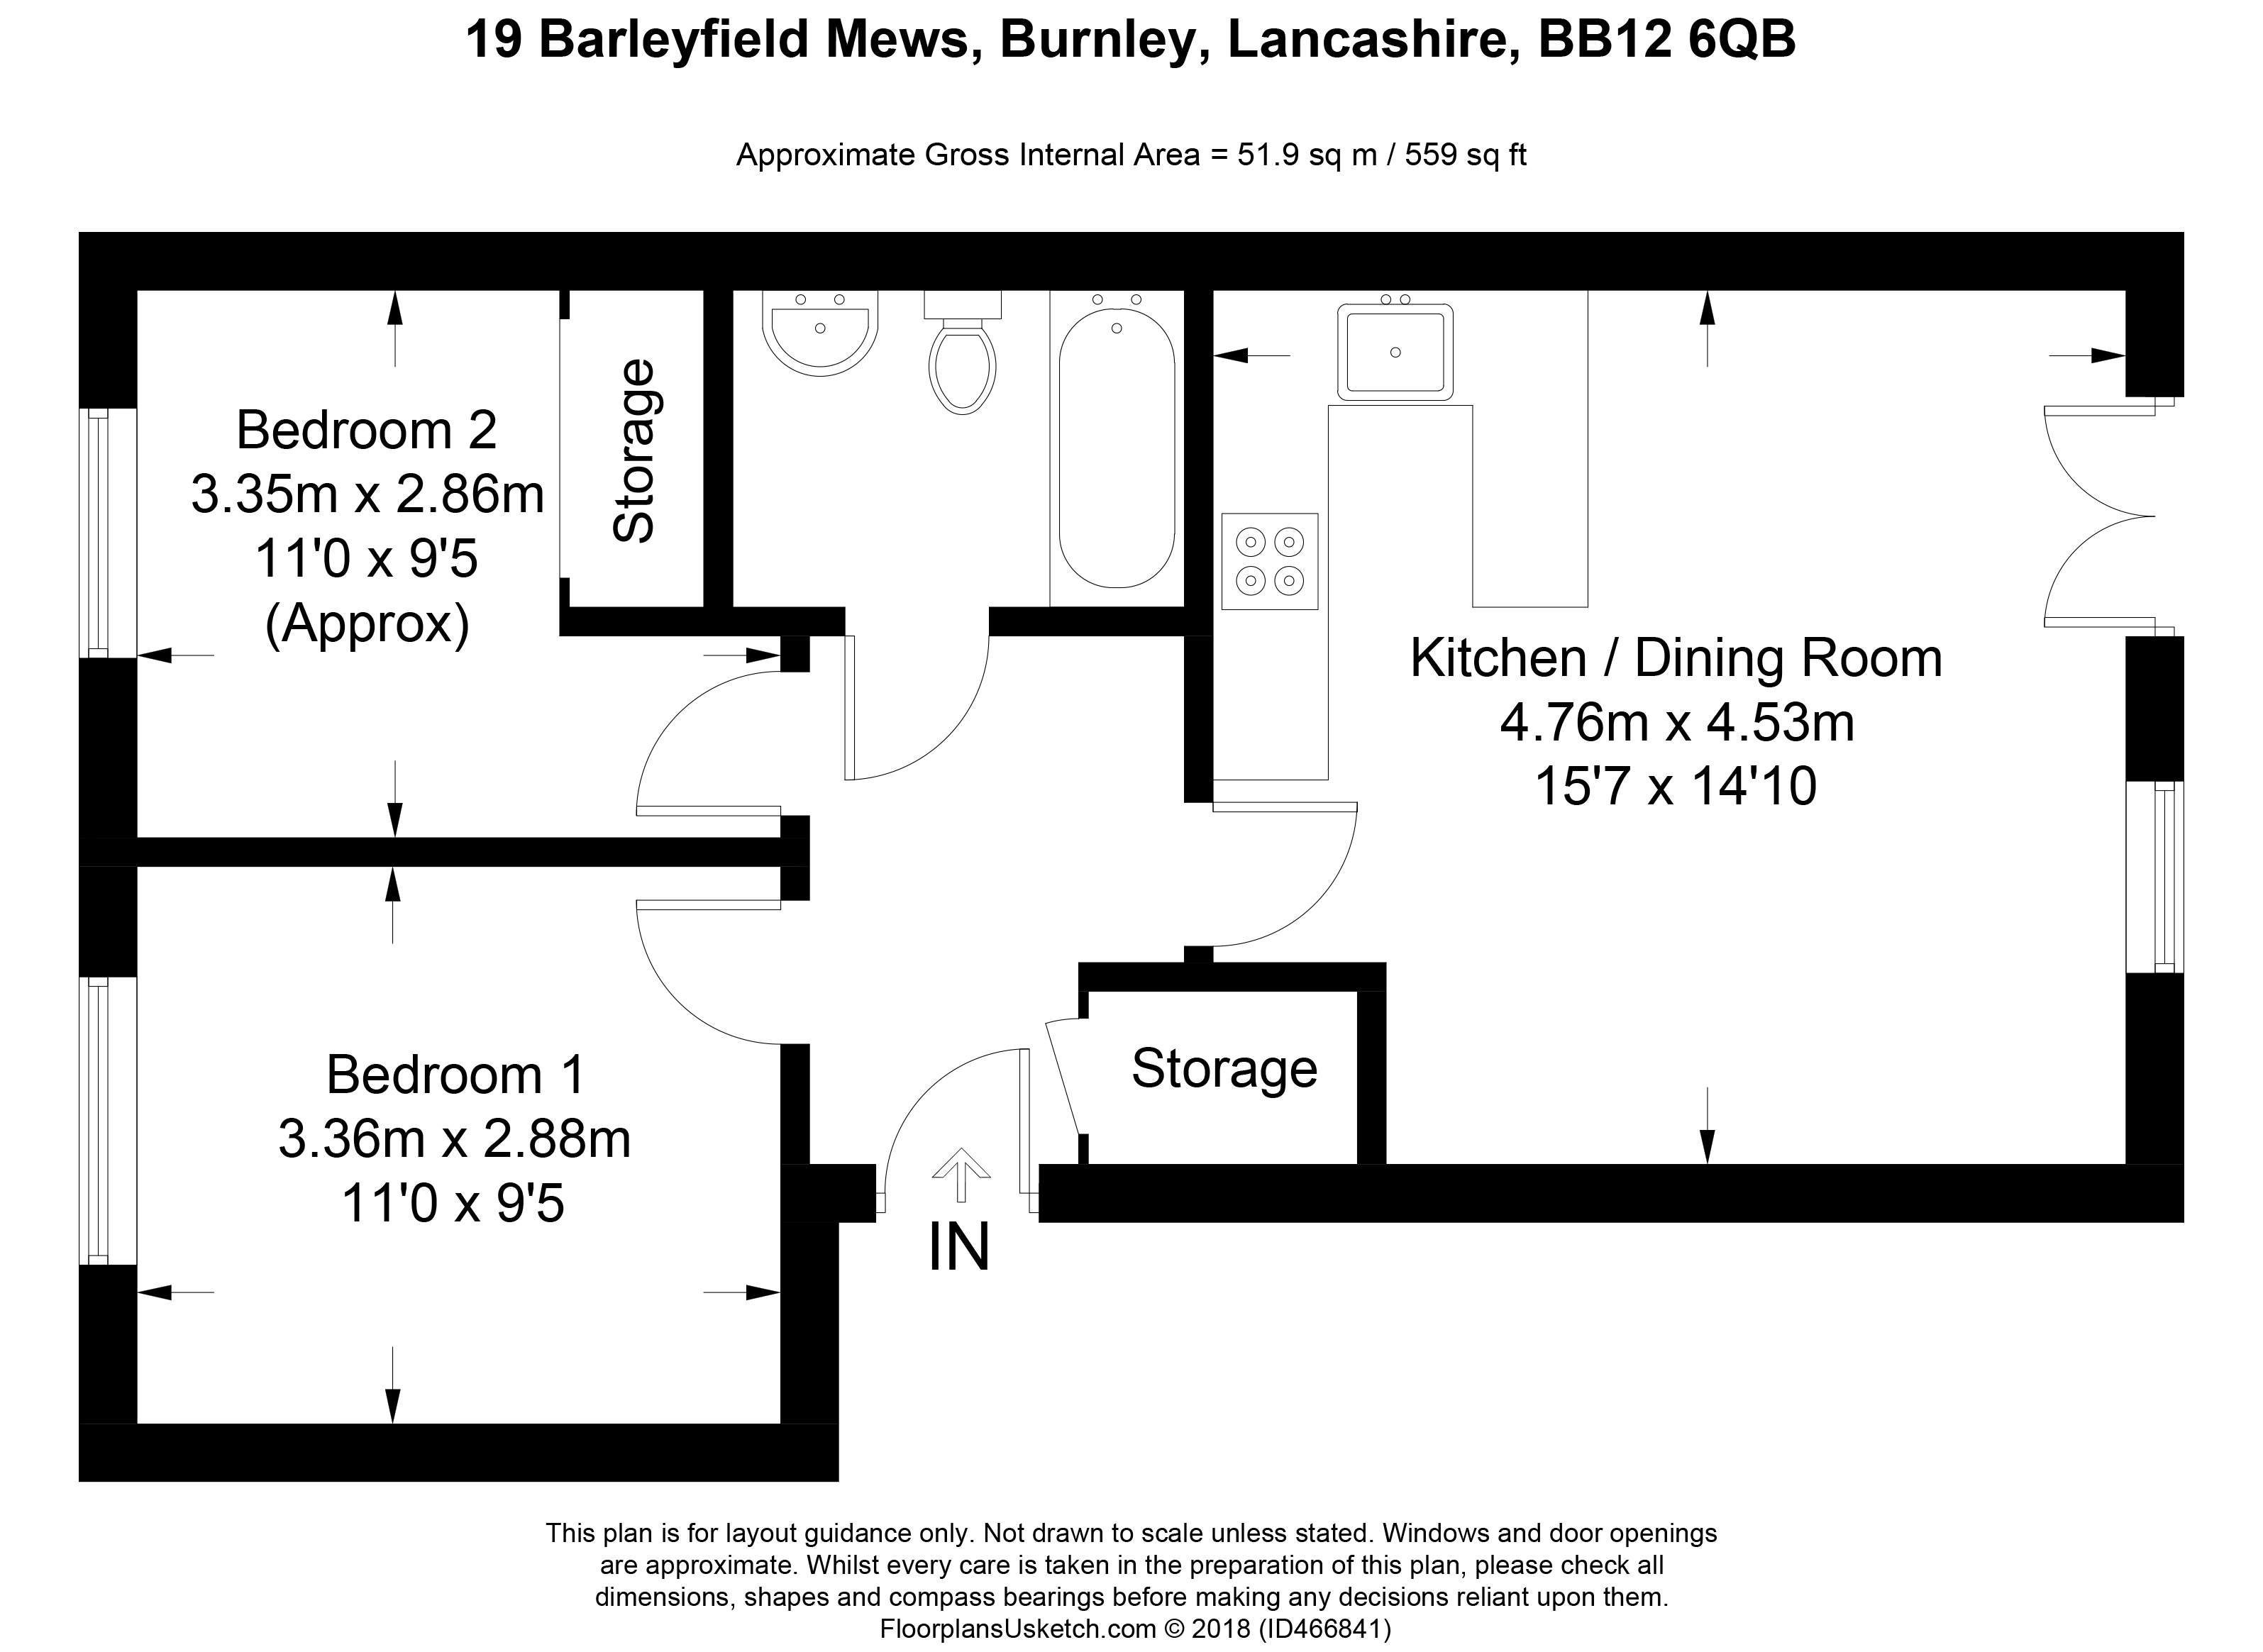 2 Bedrooms Flat for sale in Barleyfield Mews, Burnley, Lancashire BB12